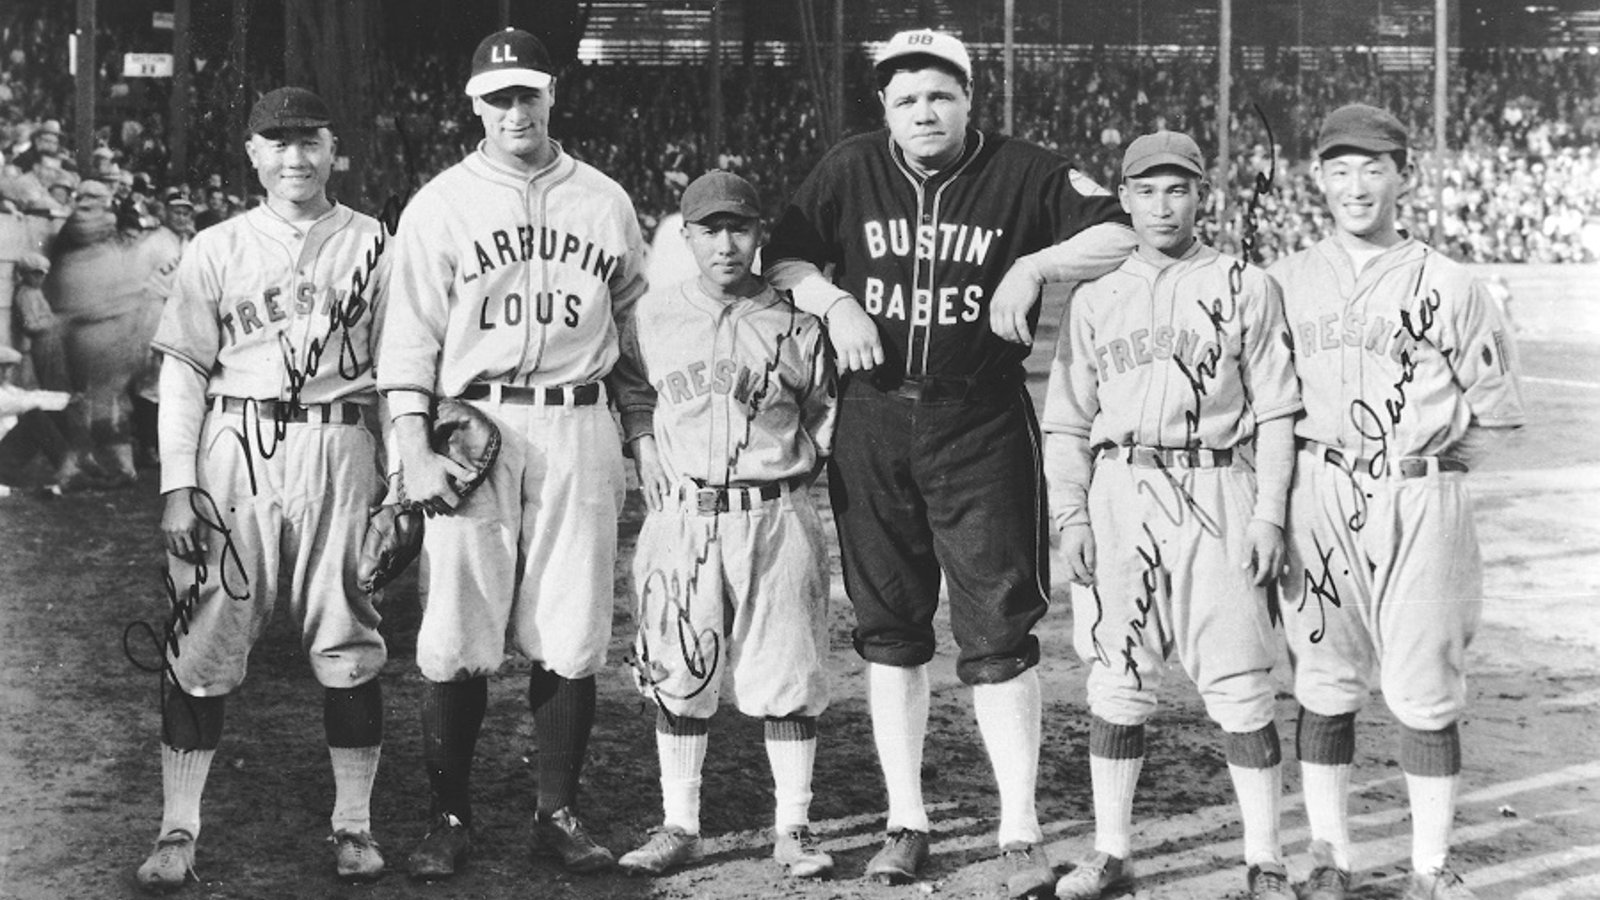 Diamonds in the Rough - Legacy of Japanese-American Baseball